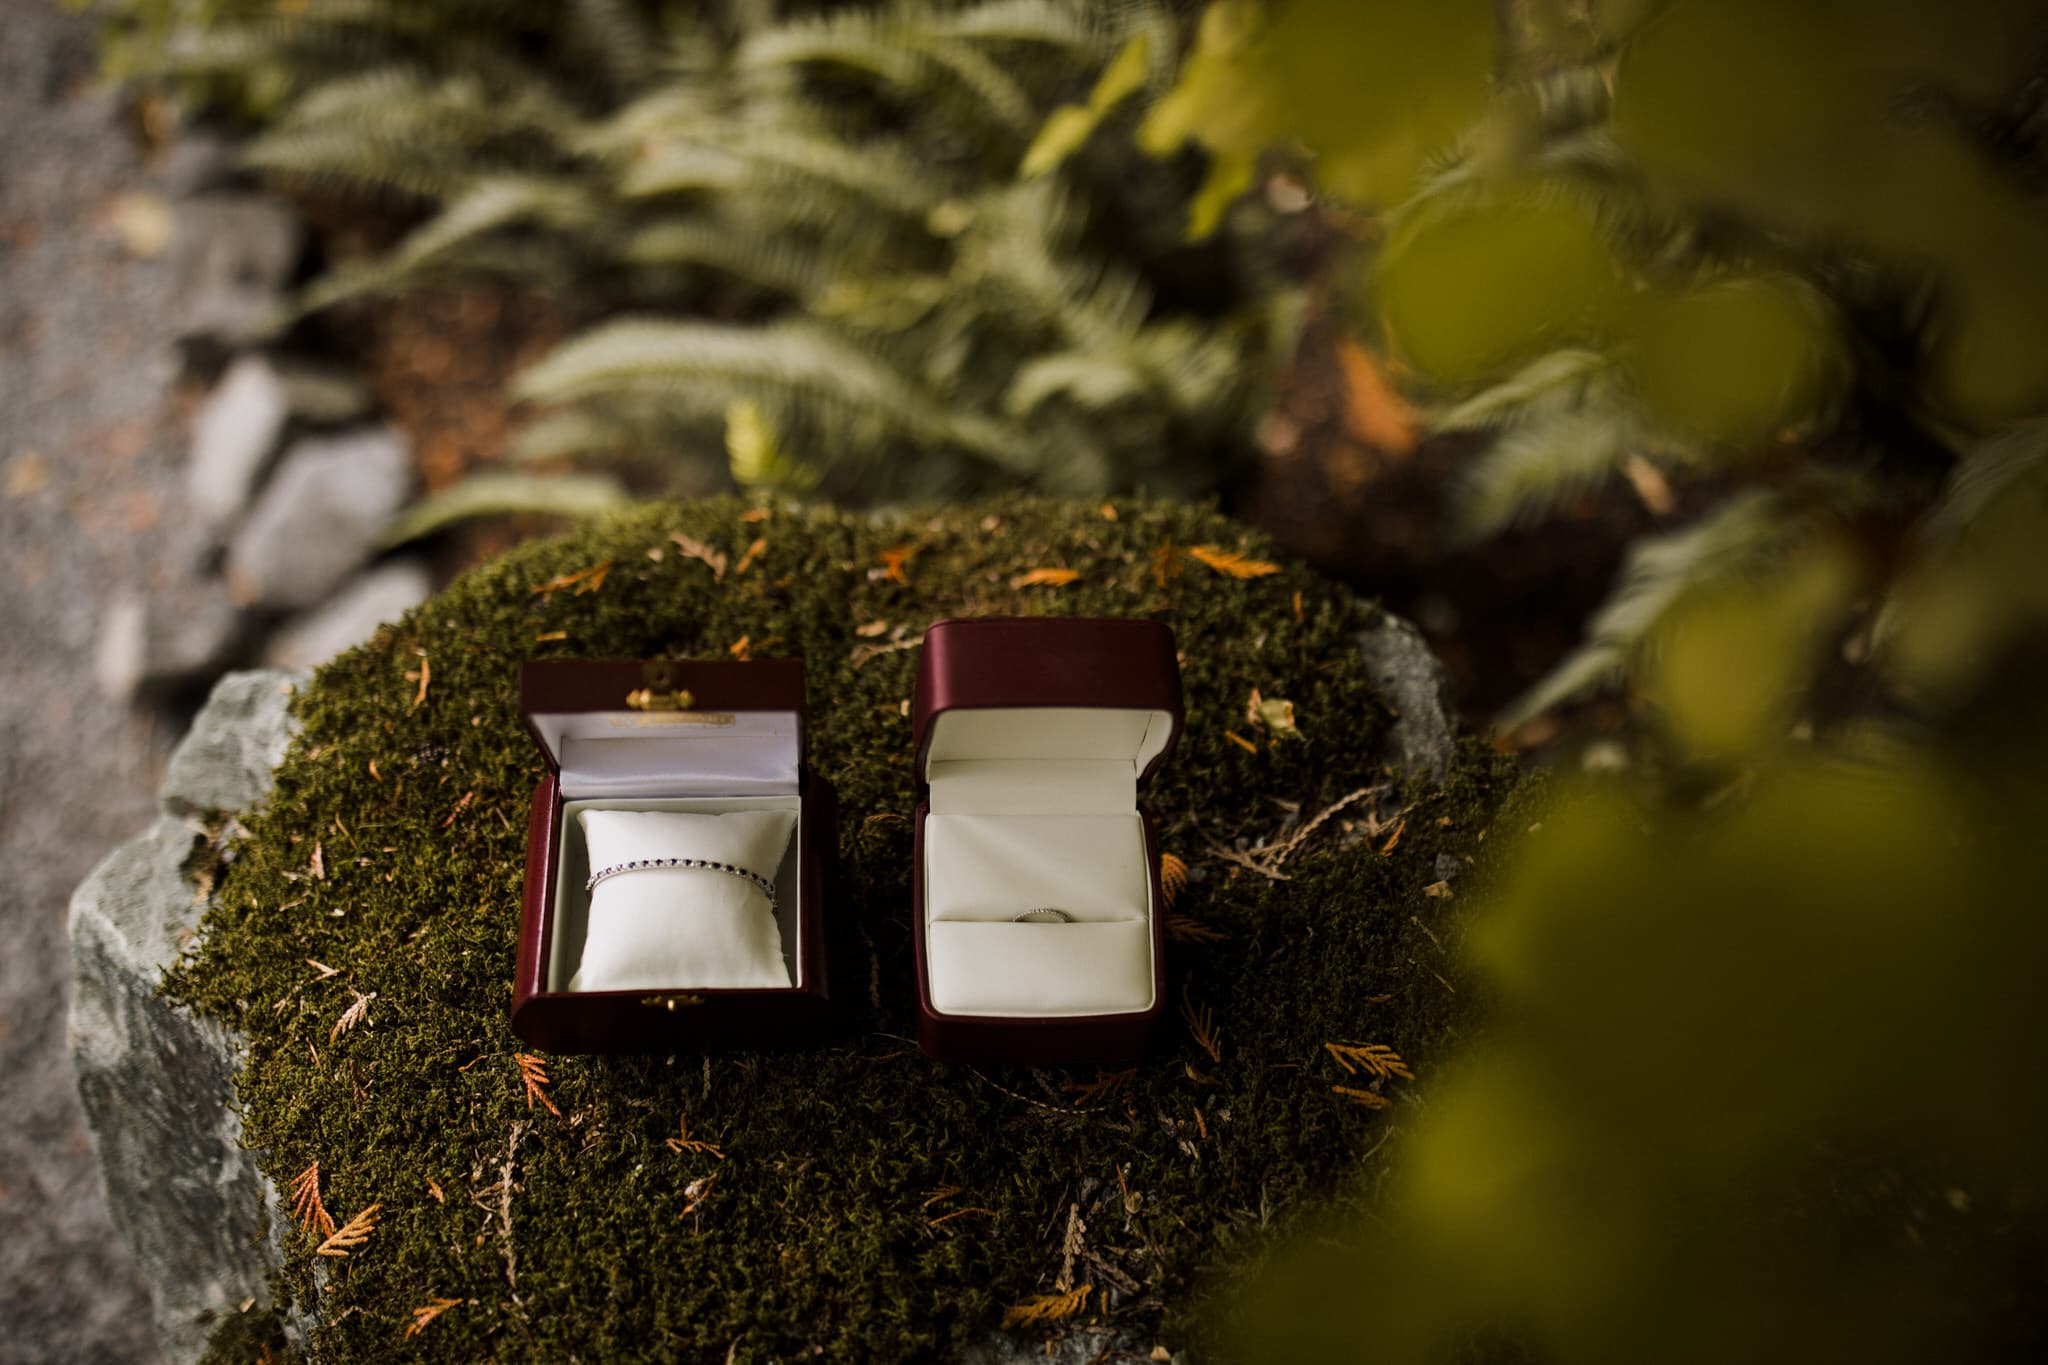 Wedding jewellery sitting on moss in the forests of Whistler Mountain. Destination wedding photographer Brent Calis.